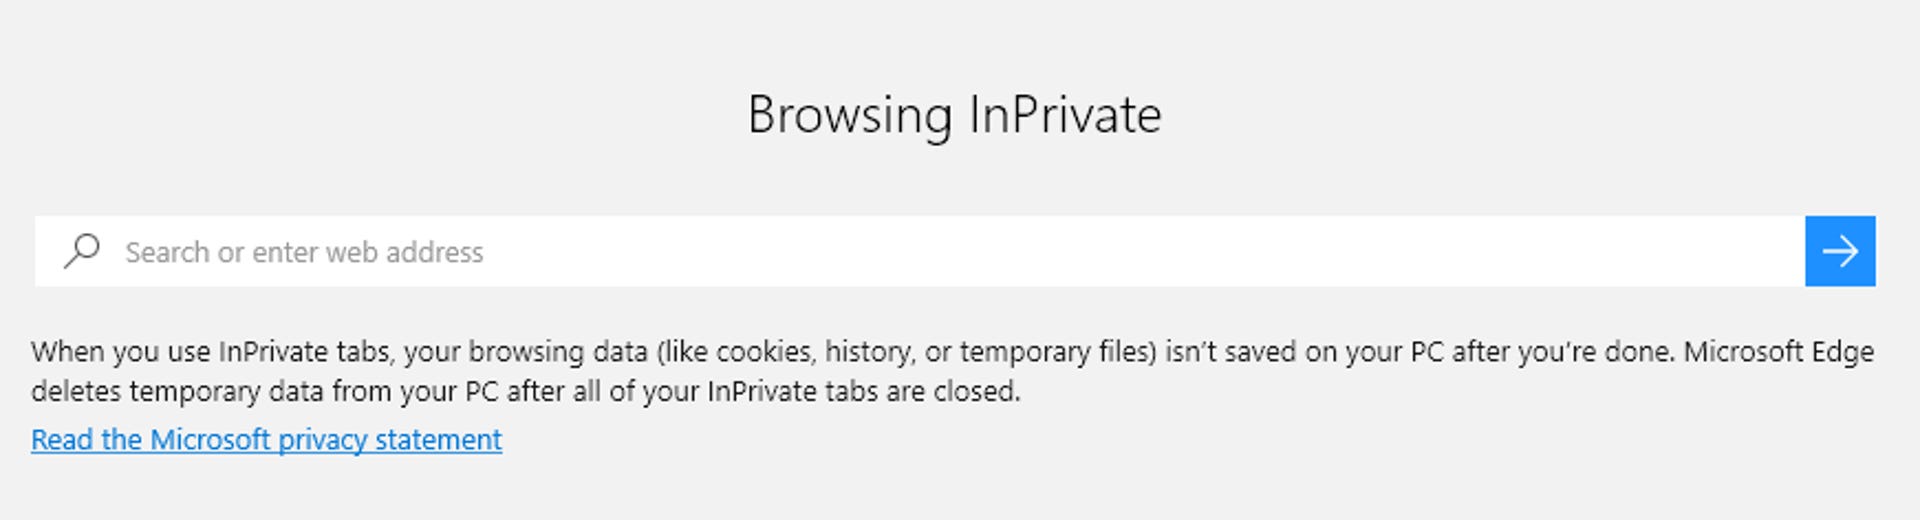 in-private-browsing.png